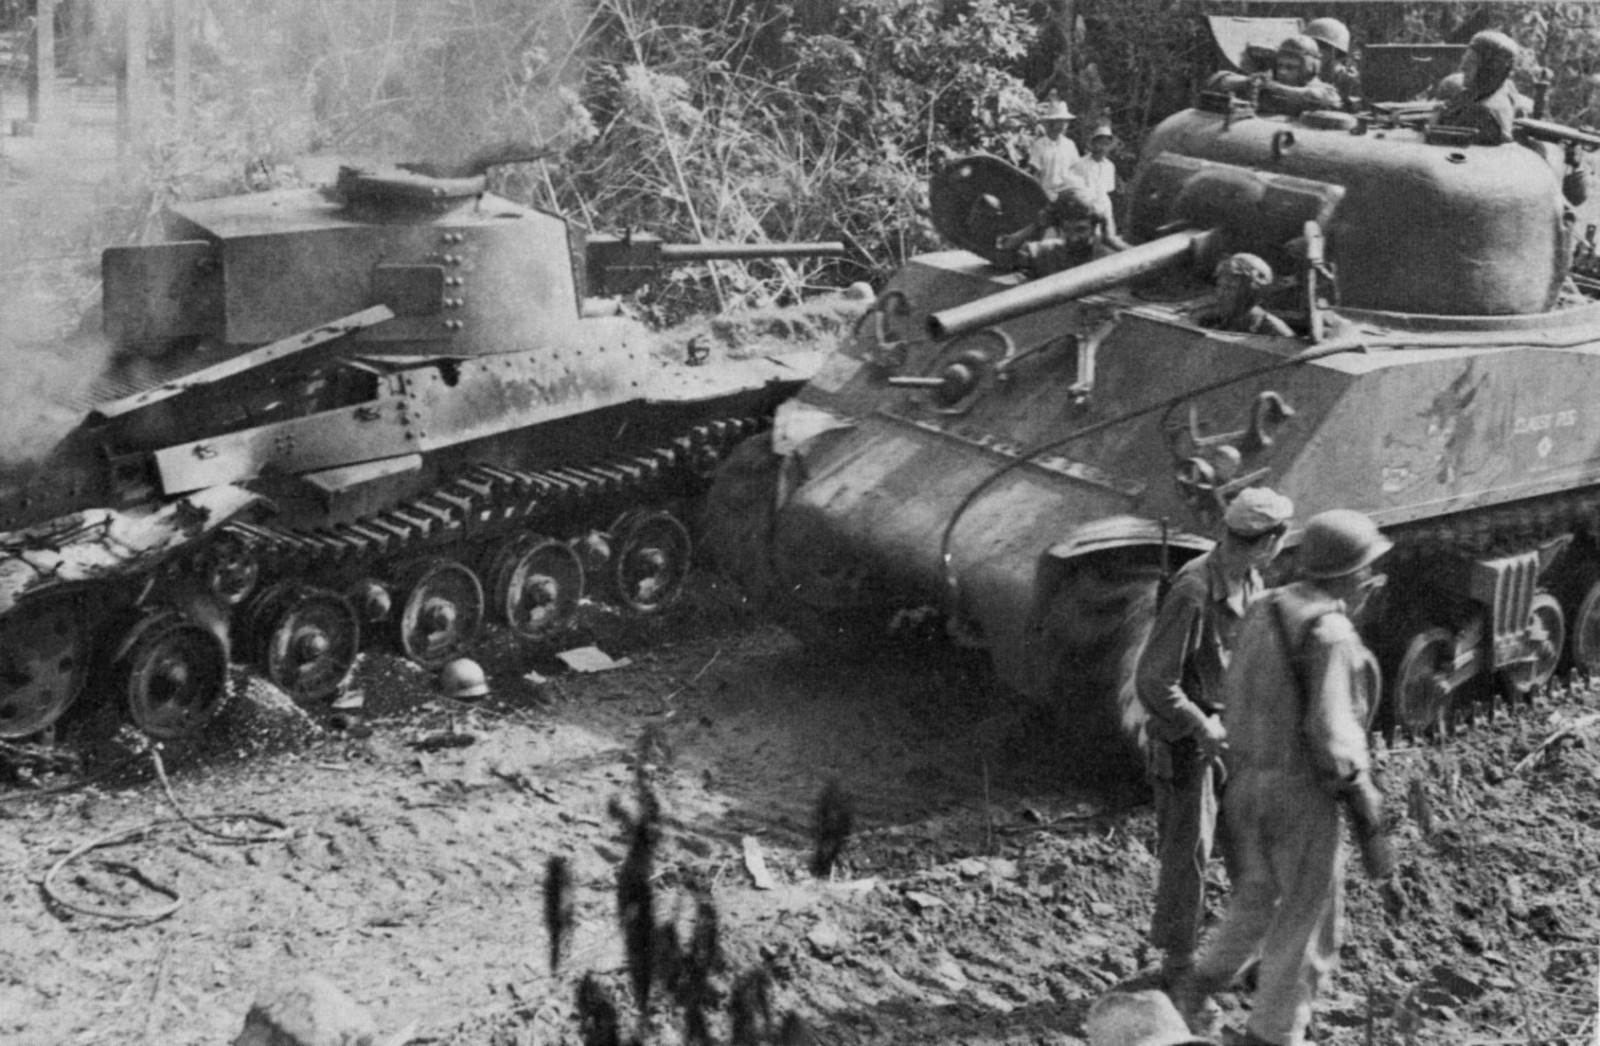 Classy-Peg-passing-destroyed-Japanese-Shinhoto-Chiha-tank-on-Luzon-in-the-Phillipines-17-Jan-1945